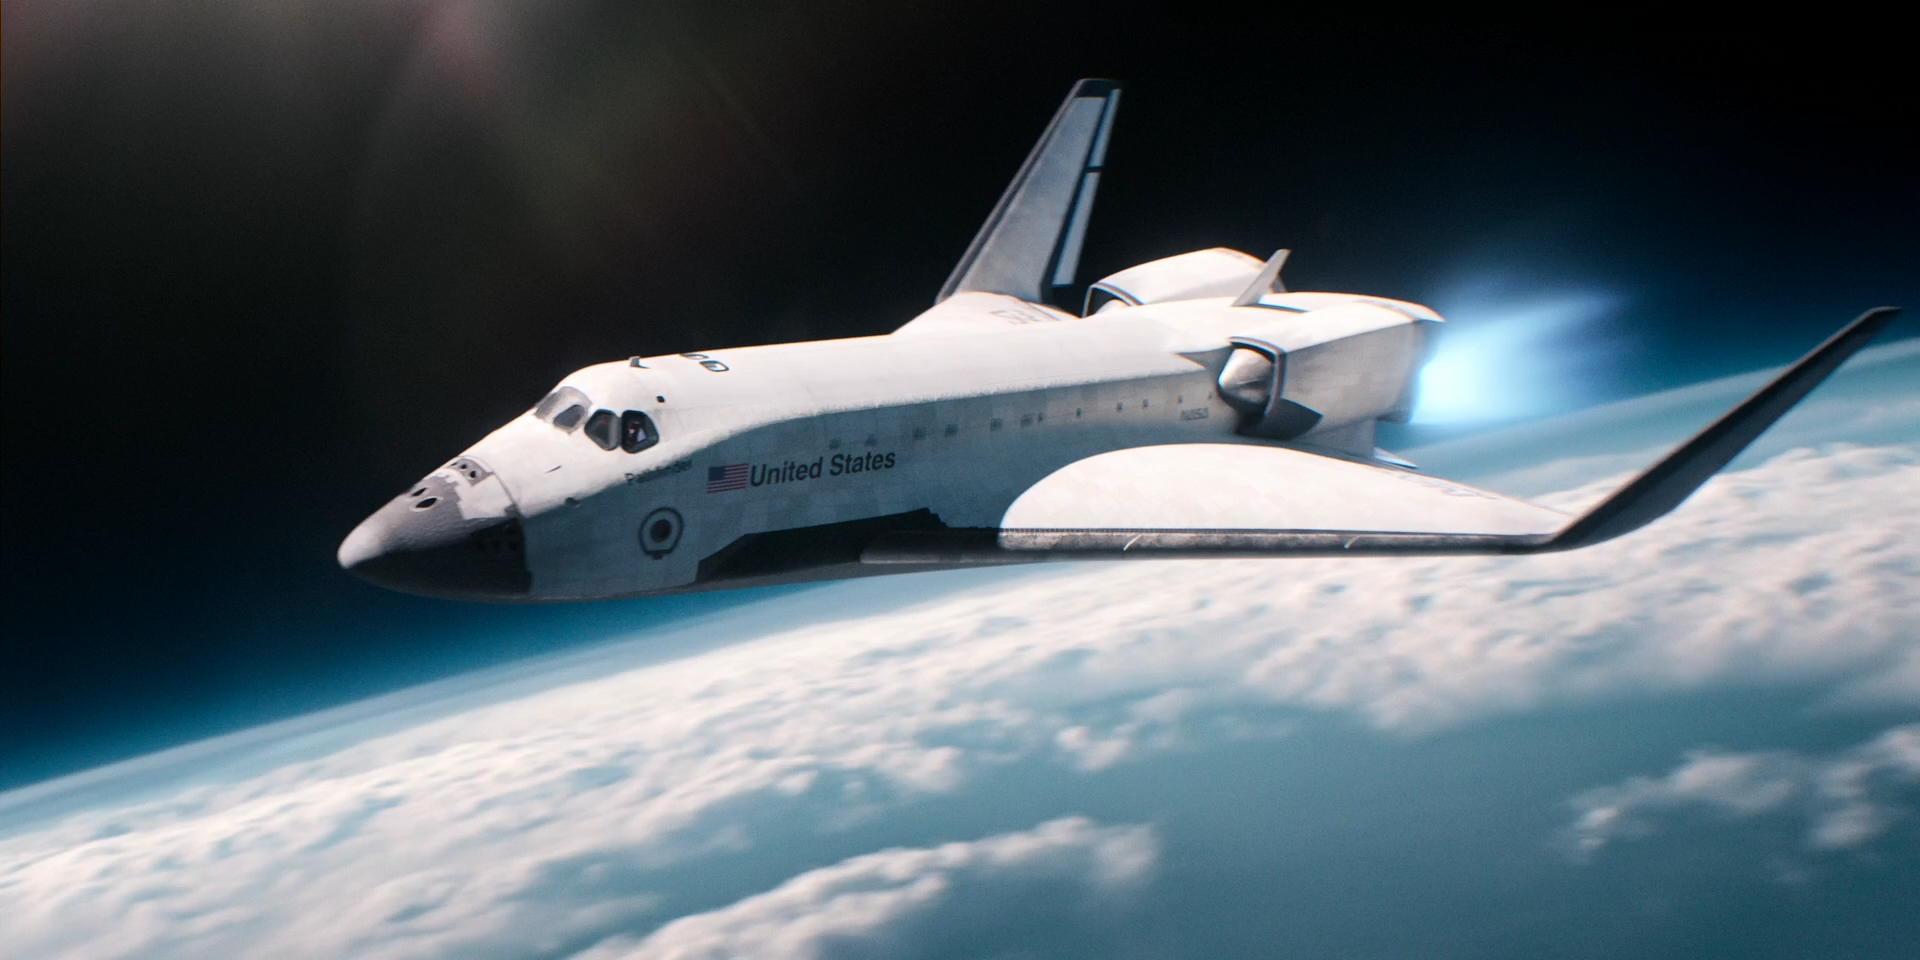 For All Mankind: Pathfinder Space Shuttle by Ka-Pow96 on DeviantArt